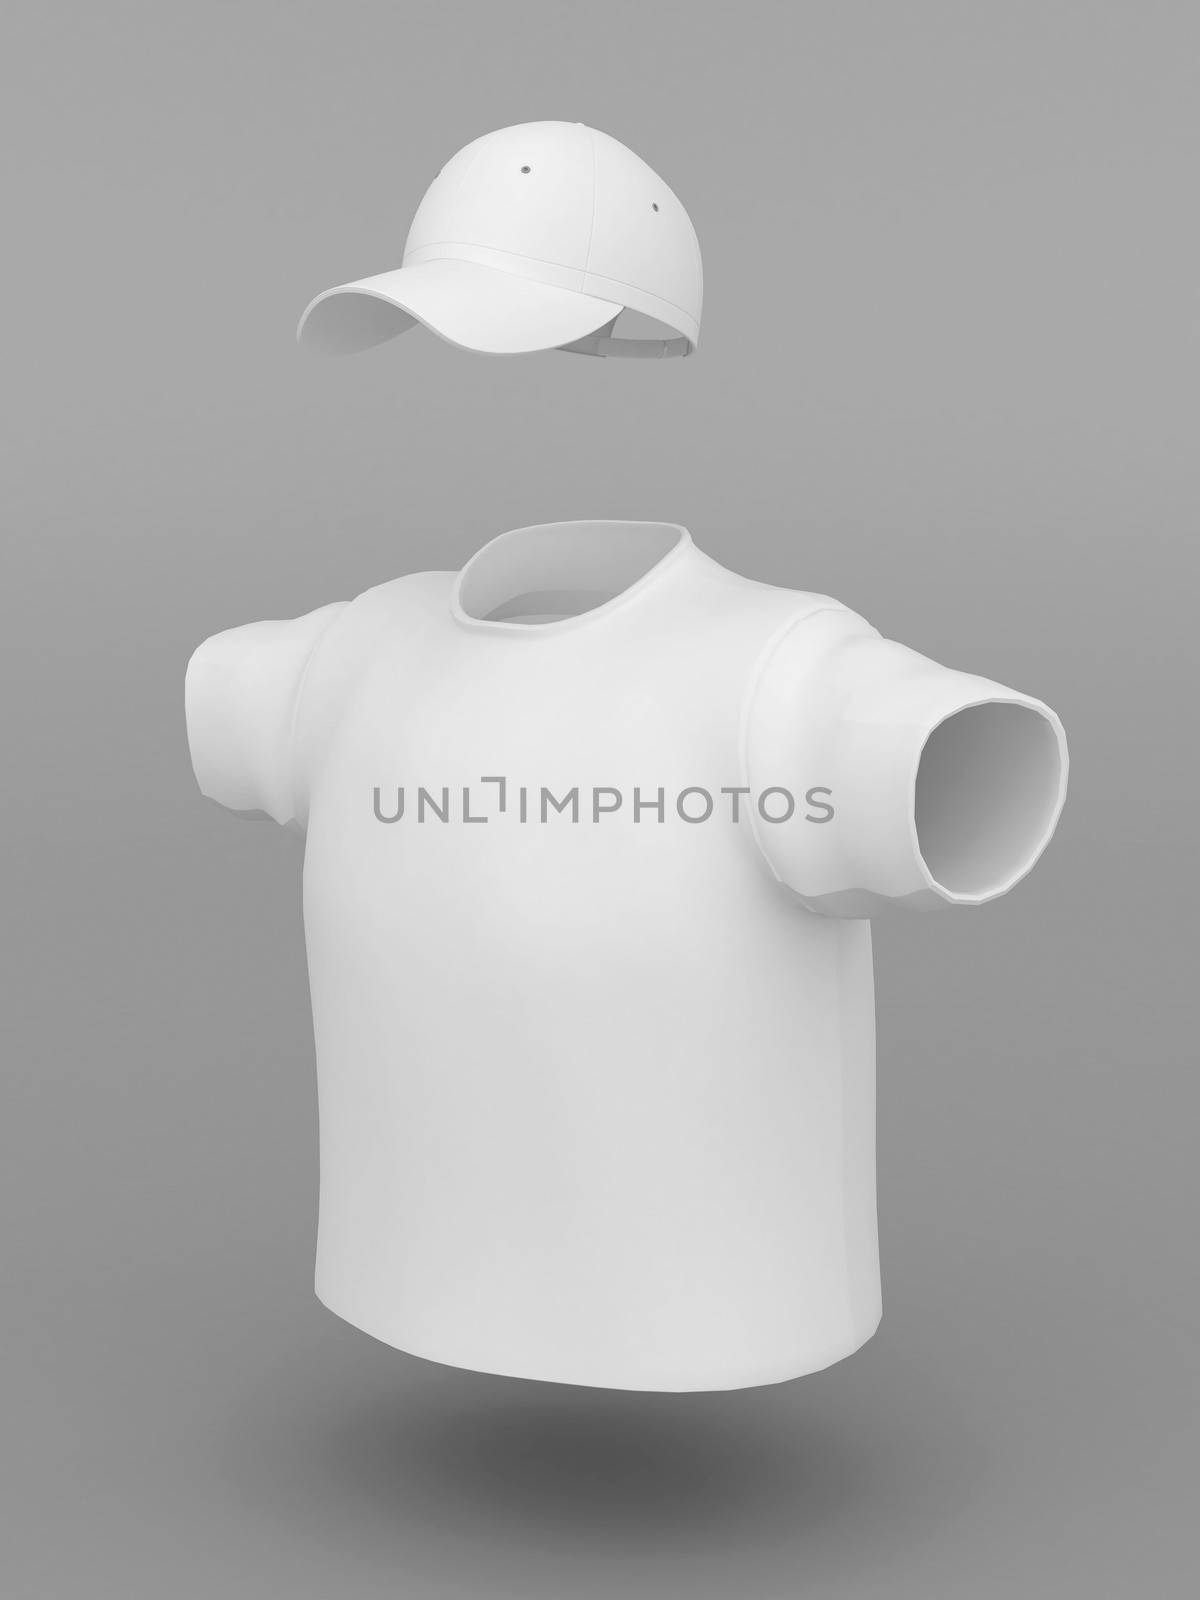 white cap and t-shirt on a gray background